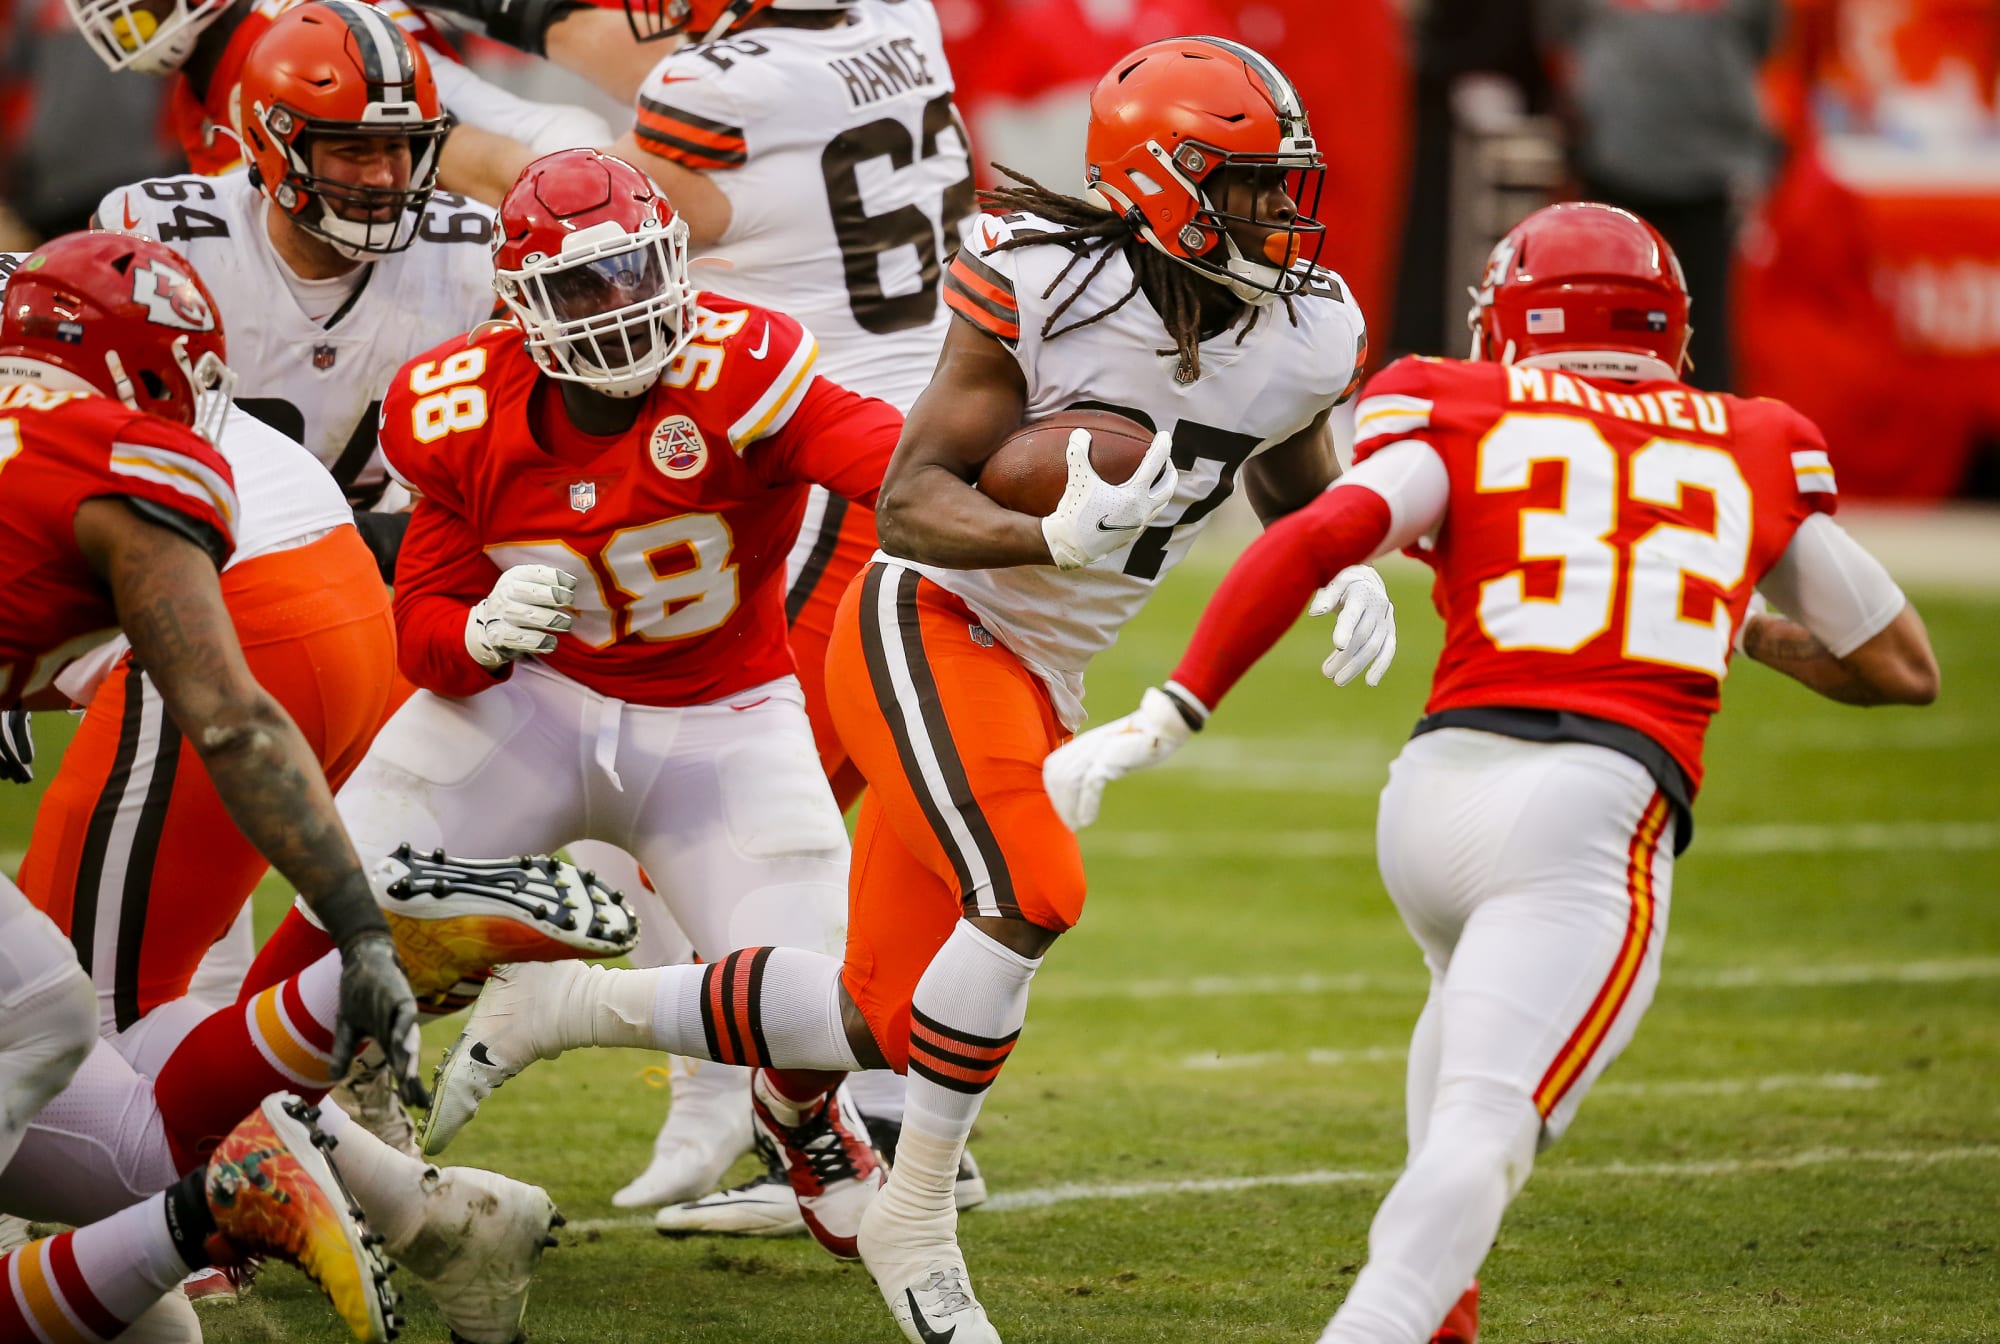 Cleveland Browns vs. Chiefs The next great rivalry in the AFC?